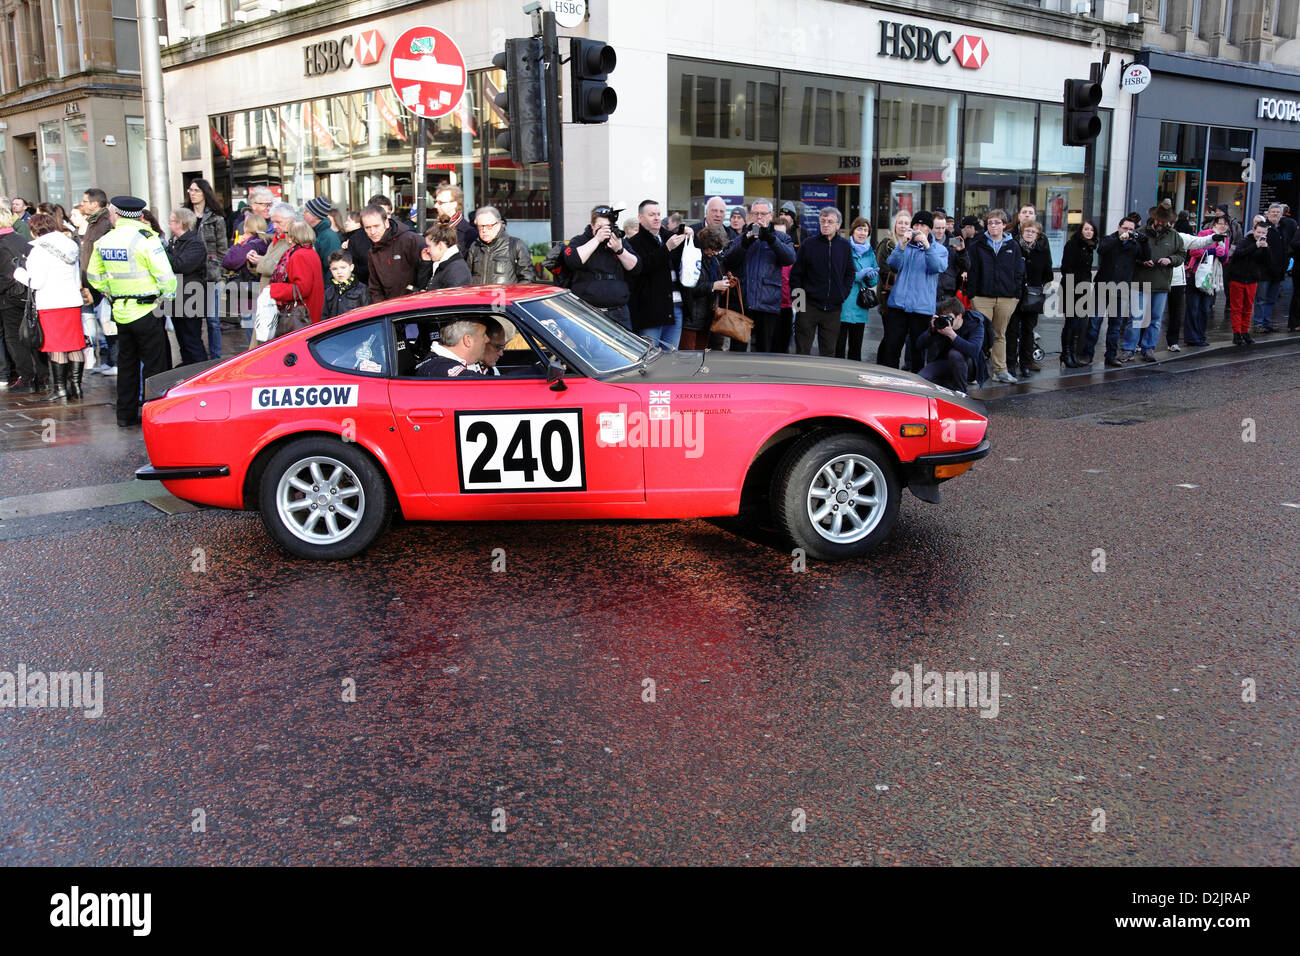 Buchanan Street, Glasgow, Scotland, UK, Saturday, 26th January, 2013. A participant departing in a Datsun 240z car before the start of the Monte Carlo Classic Rally Stock Photo